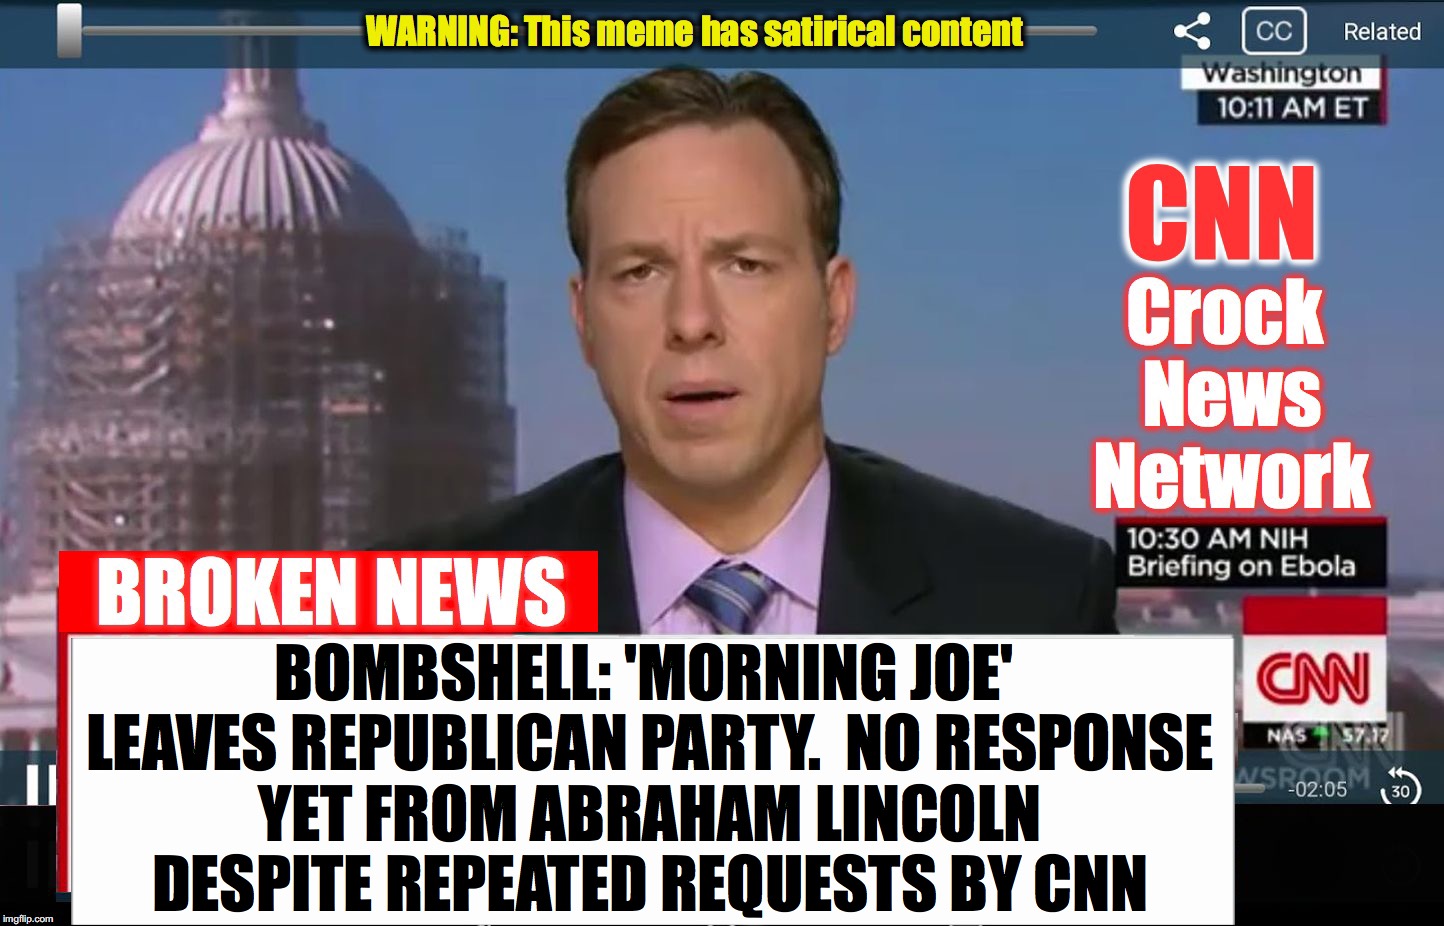 CNN Broken News  | BOMBSHELL: 'MORNING JOE' LEAVES REPUBLICAN PARTY.  NO RESPONSE YET FROM ABRAHAM LINCOLN DESPITE REPEATED REQUESTS BY CNN | image tagged in cnn broken news | made w/ Imgflip meme maker